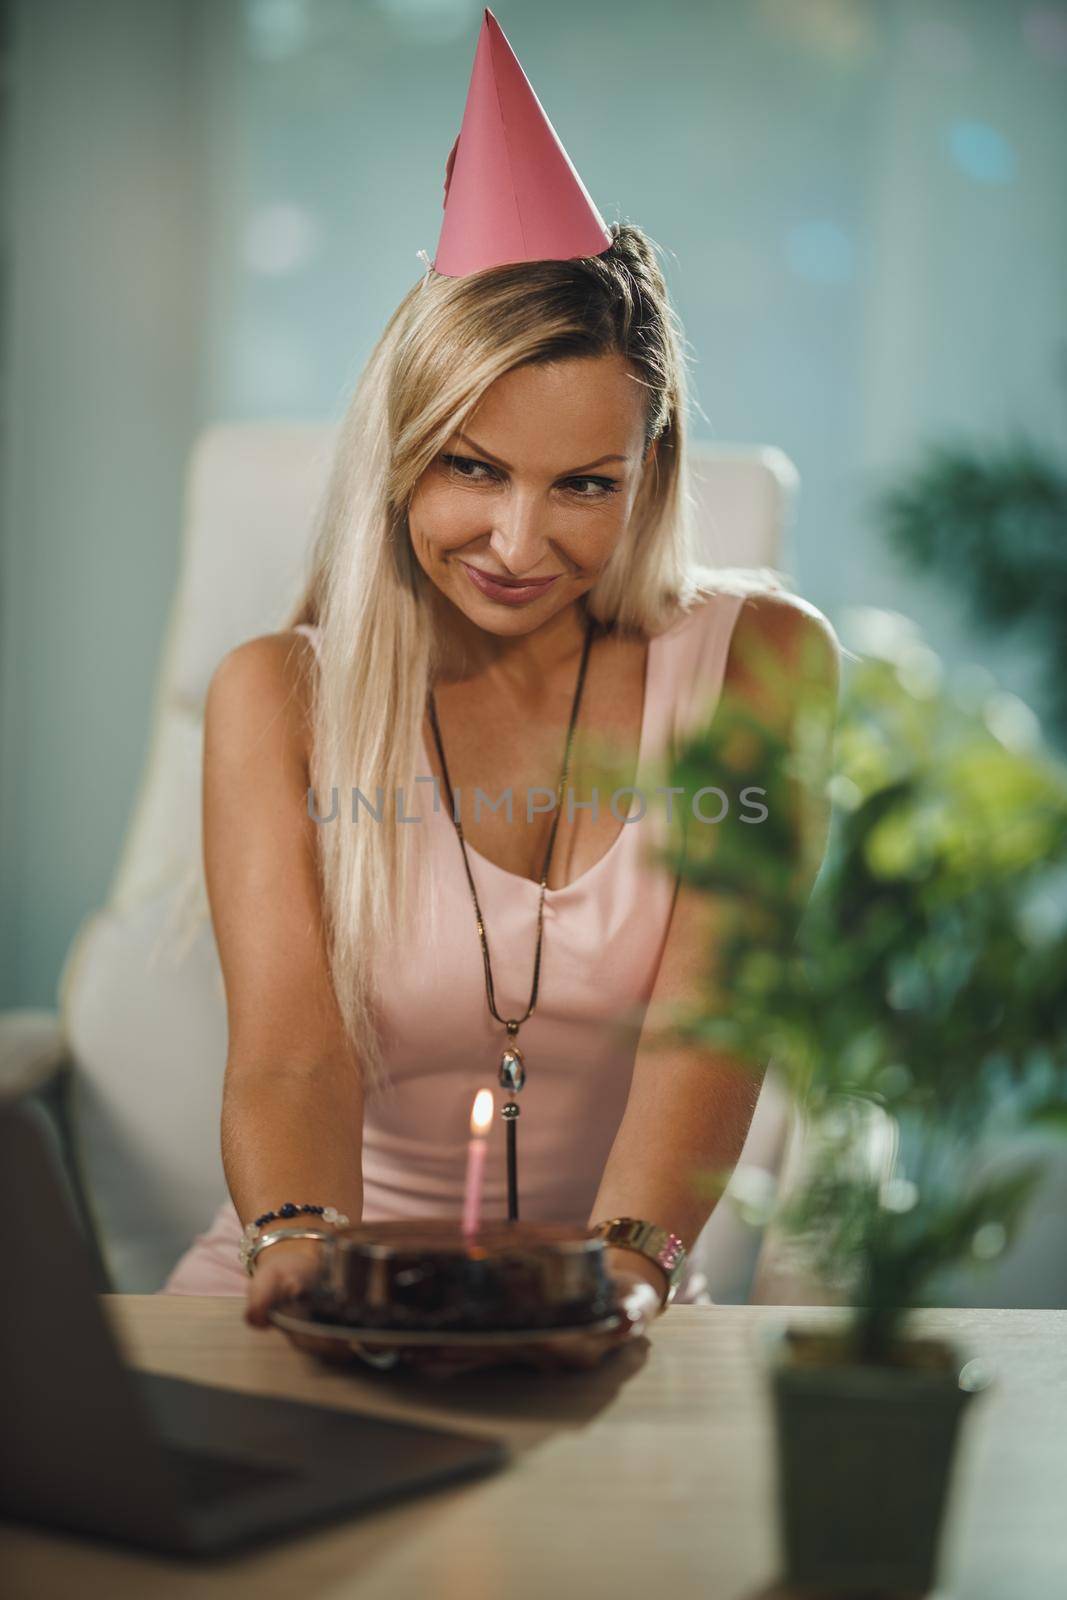 Woman Celebrating Birthday Alone At Home by MilanMarkovic78